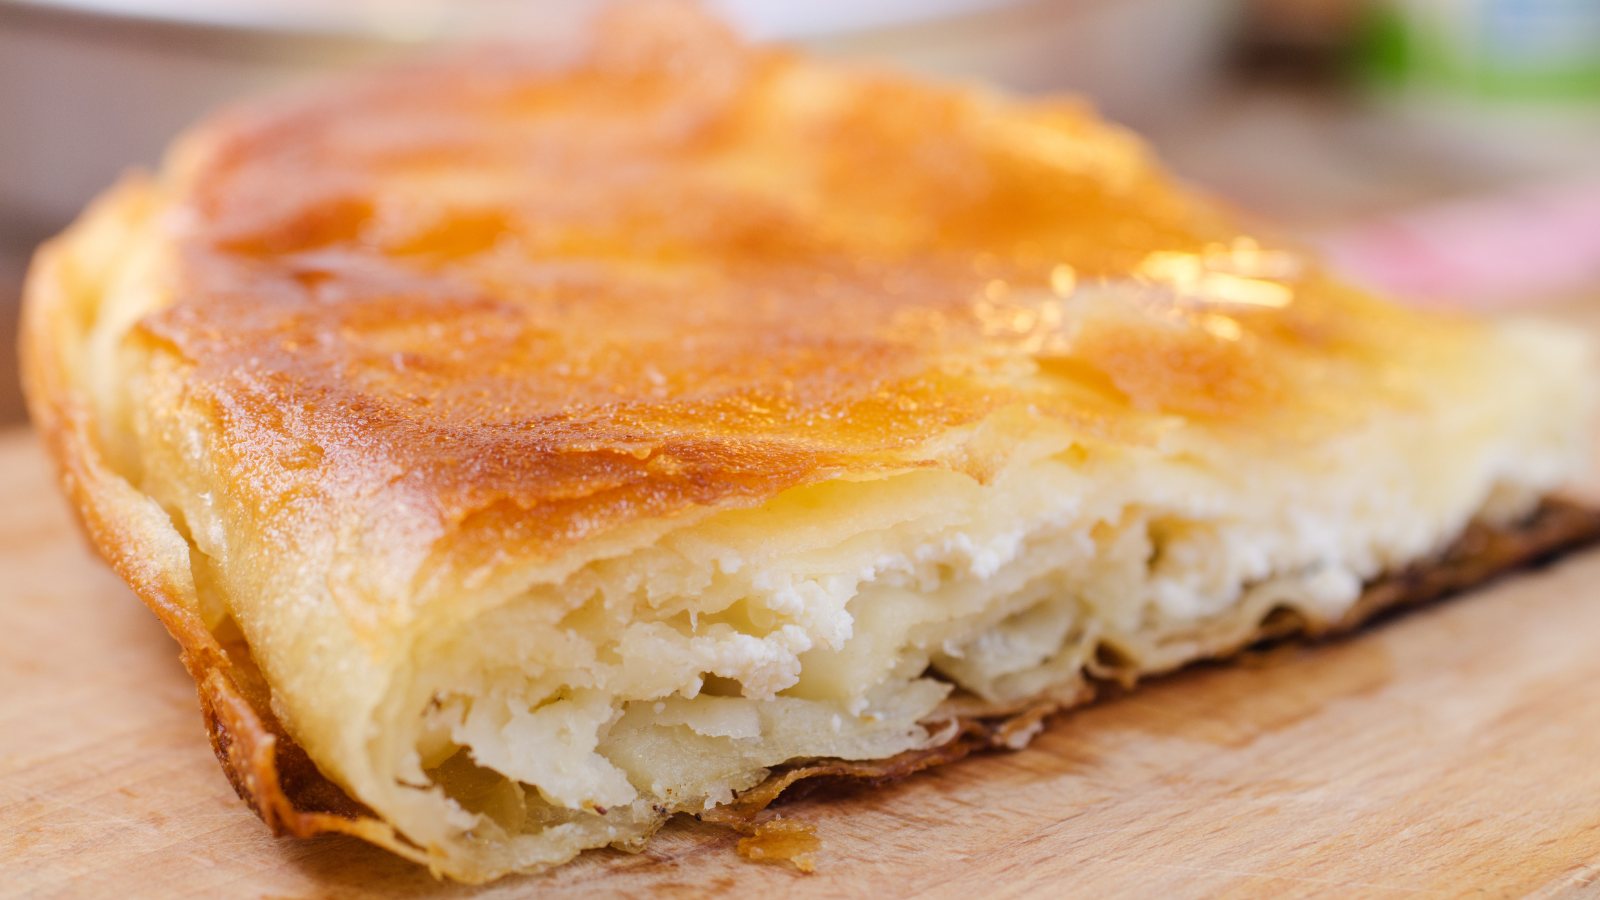 Burek is a traditional pastry enjoyed in the Balkans